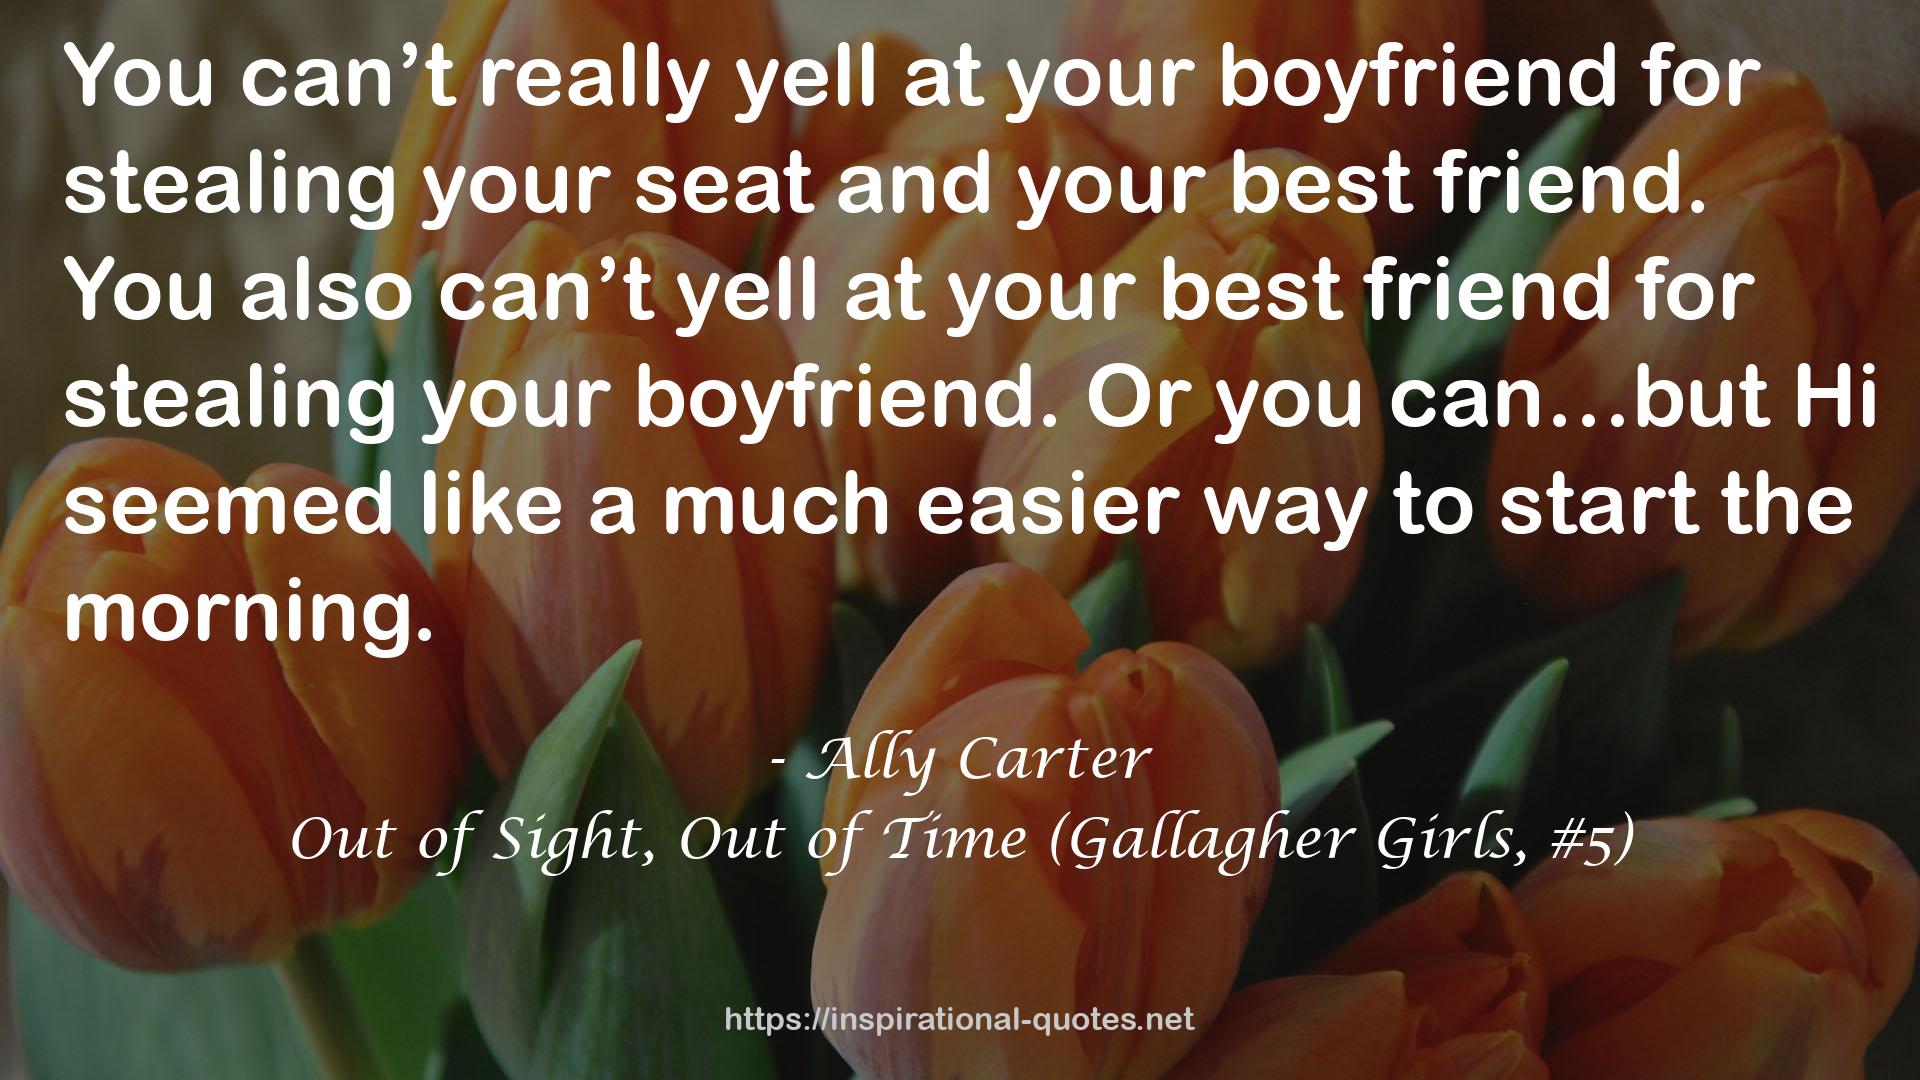 Out of Sight, Out of Time (Gallagher Girls, #5) QUOTES